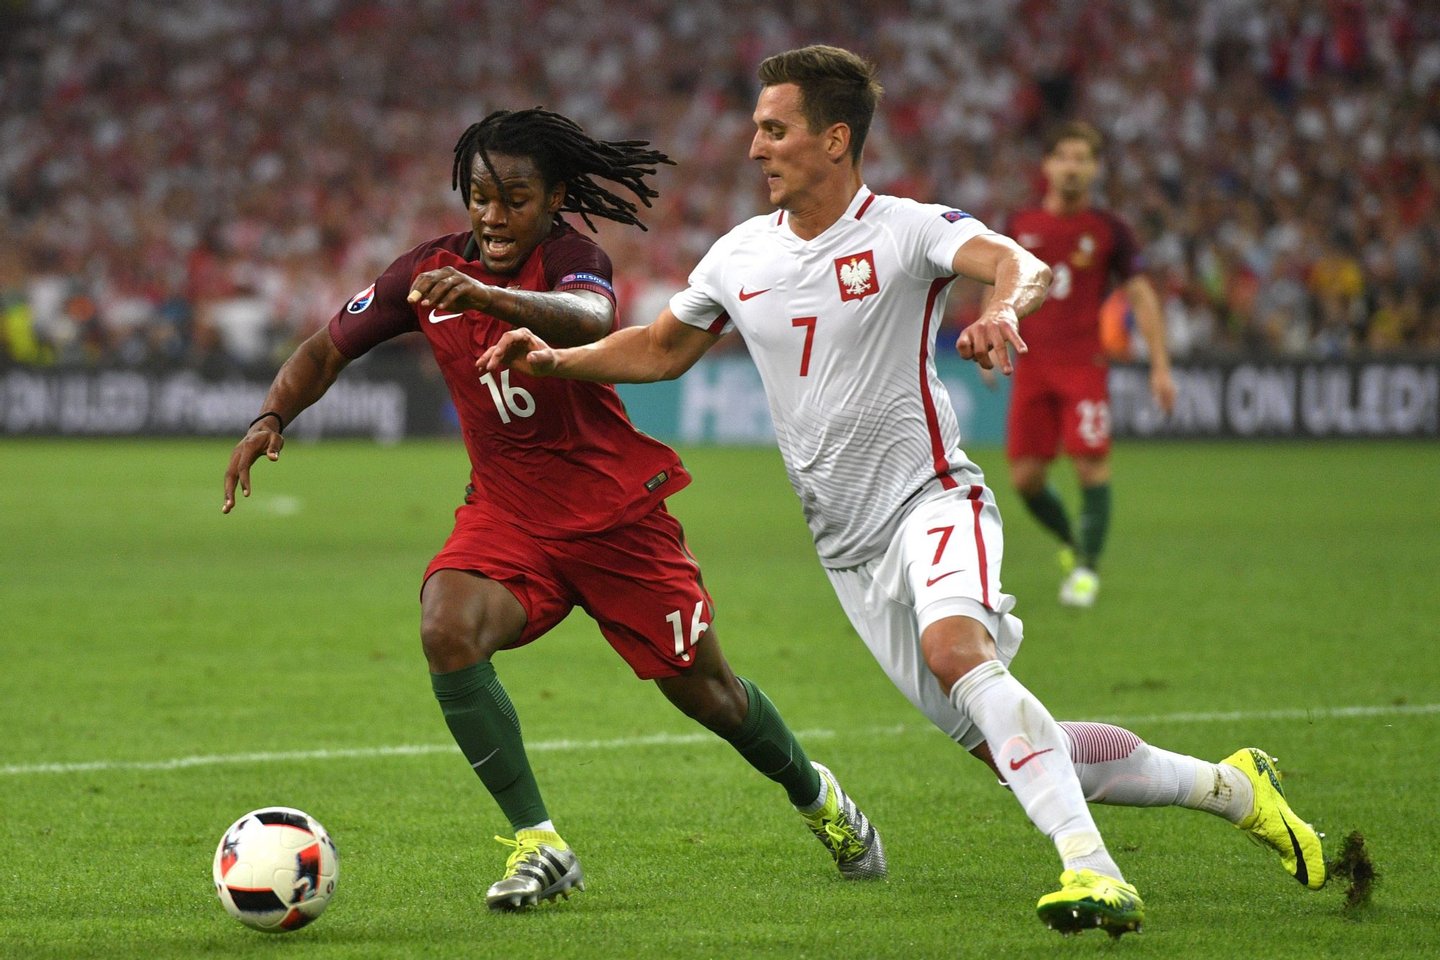 Portugal's midfielder Renato Sanches (L) vies with Poland's forward Arkadiusz Milik during the Euro 2016 quarter-final football match between Poland and Portugal at the Stade Velodrome in Marseille on June 30, 2016. / AFP / Francisco LEONG (Photo credit should read FRANCISCO LEONG/AFP/Getty Images)